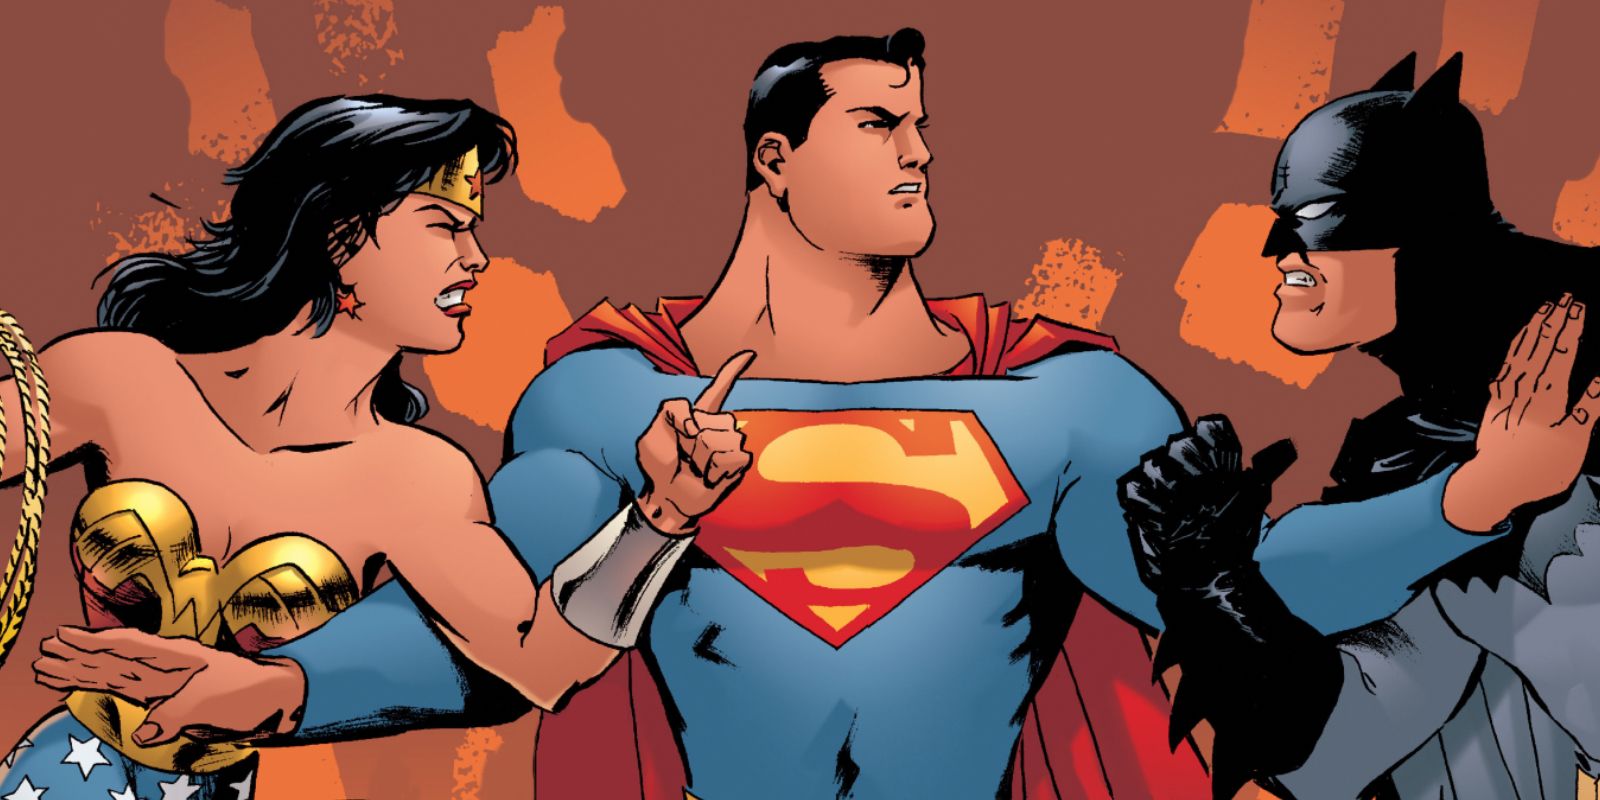 Superman stops Wonder Woman and Batman from fighting in DC Comics.